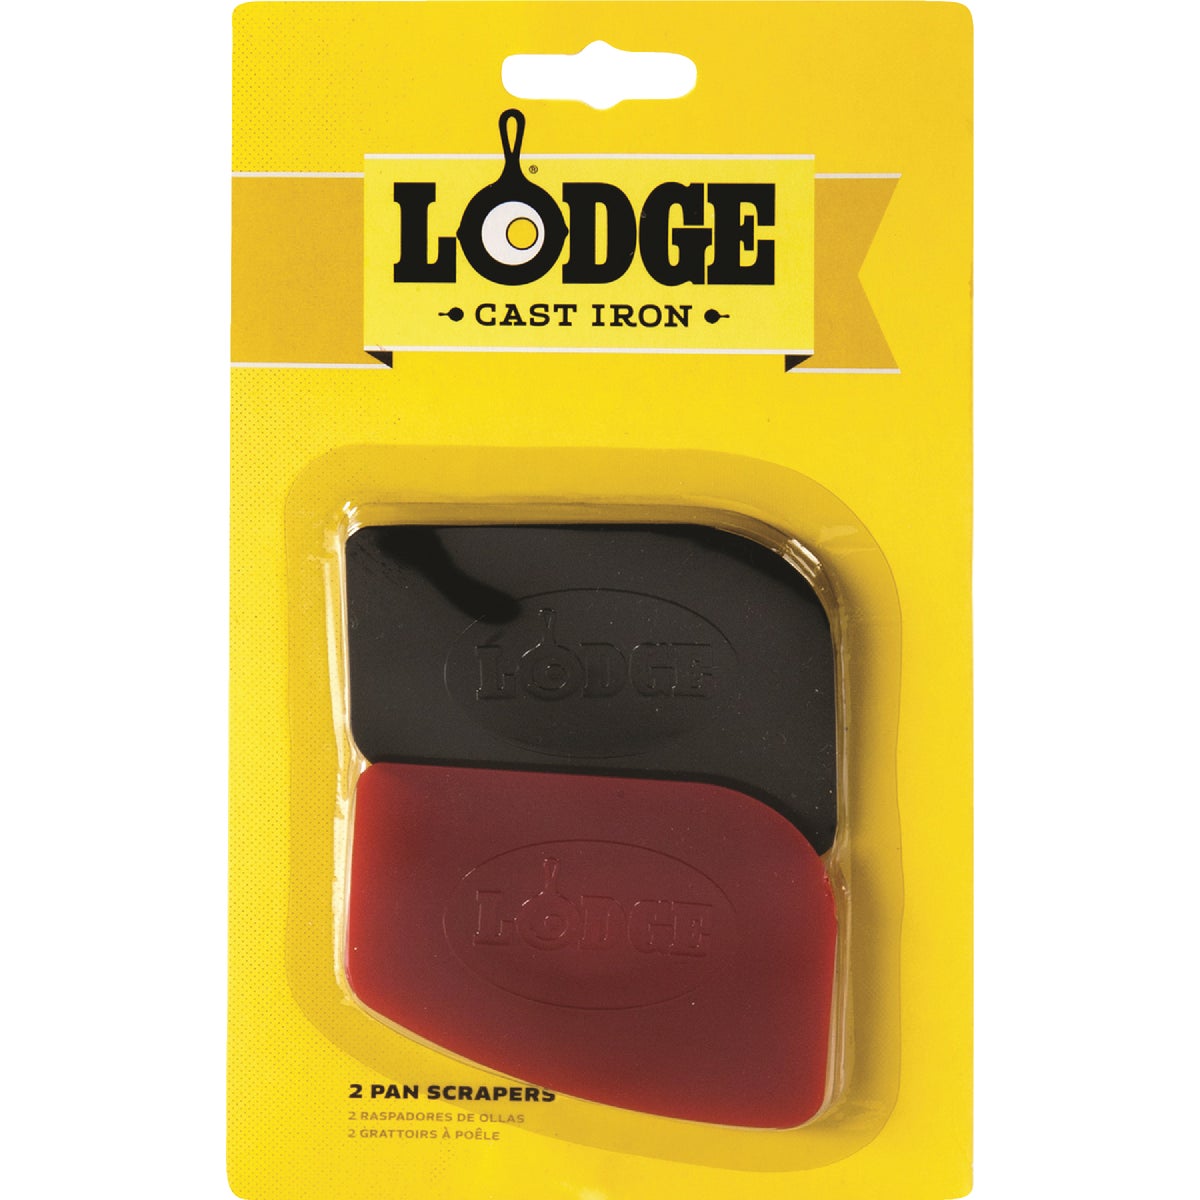 Item 601794, Lodge pan scrapers are made of rigid, easy to clean polycarbonate.